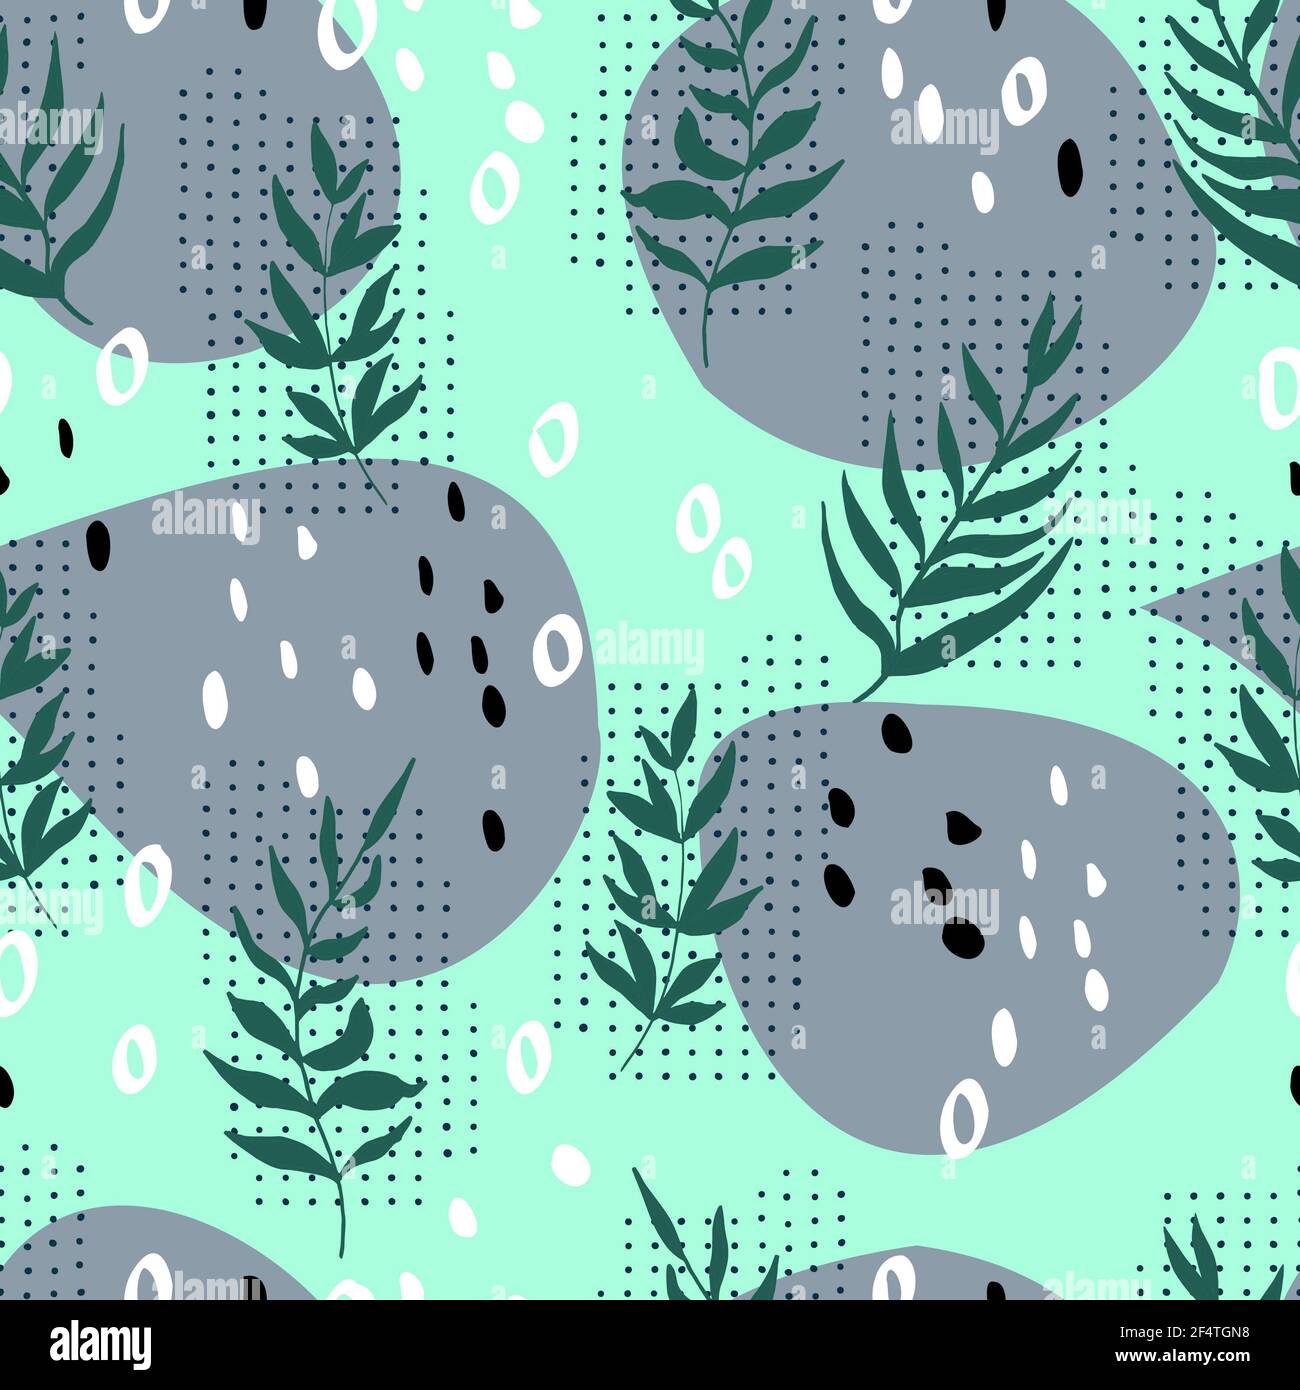 botanical abstract seamless pattern of twigs with dots and spots. Stock Photo